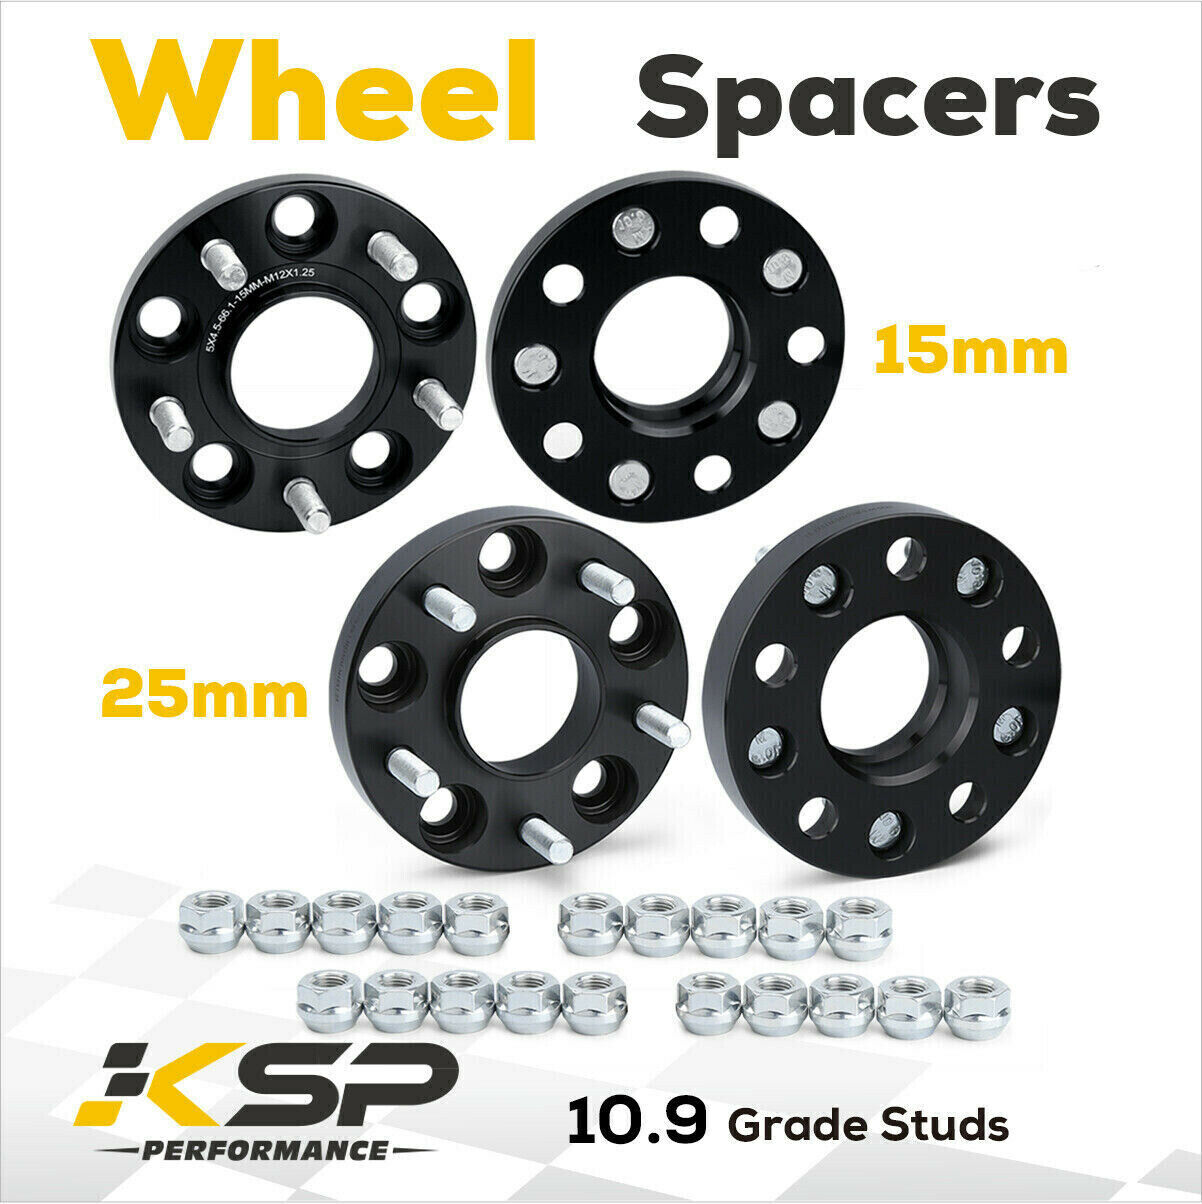 15mm + 25mm 5x4.5 to 5x114.3 Wheel Spacers For Infiniti G35 G37 Nissan 350Z 370Z